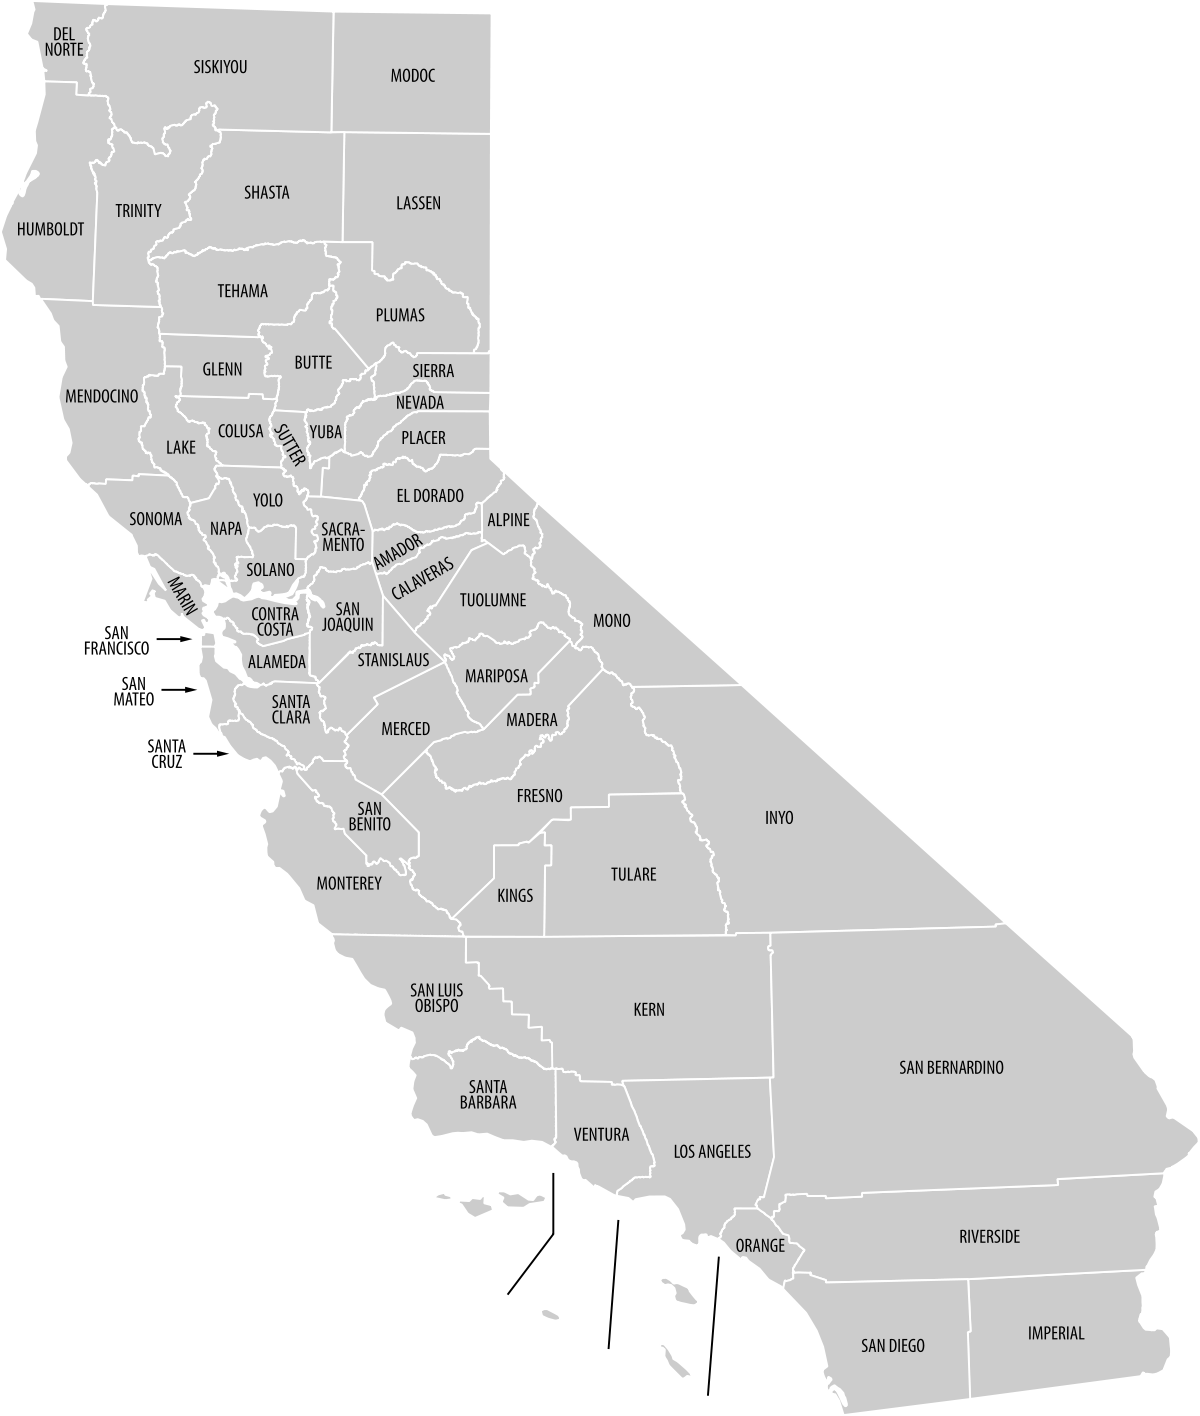 List of hospitals in California